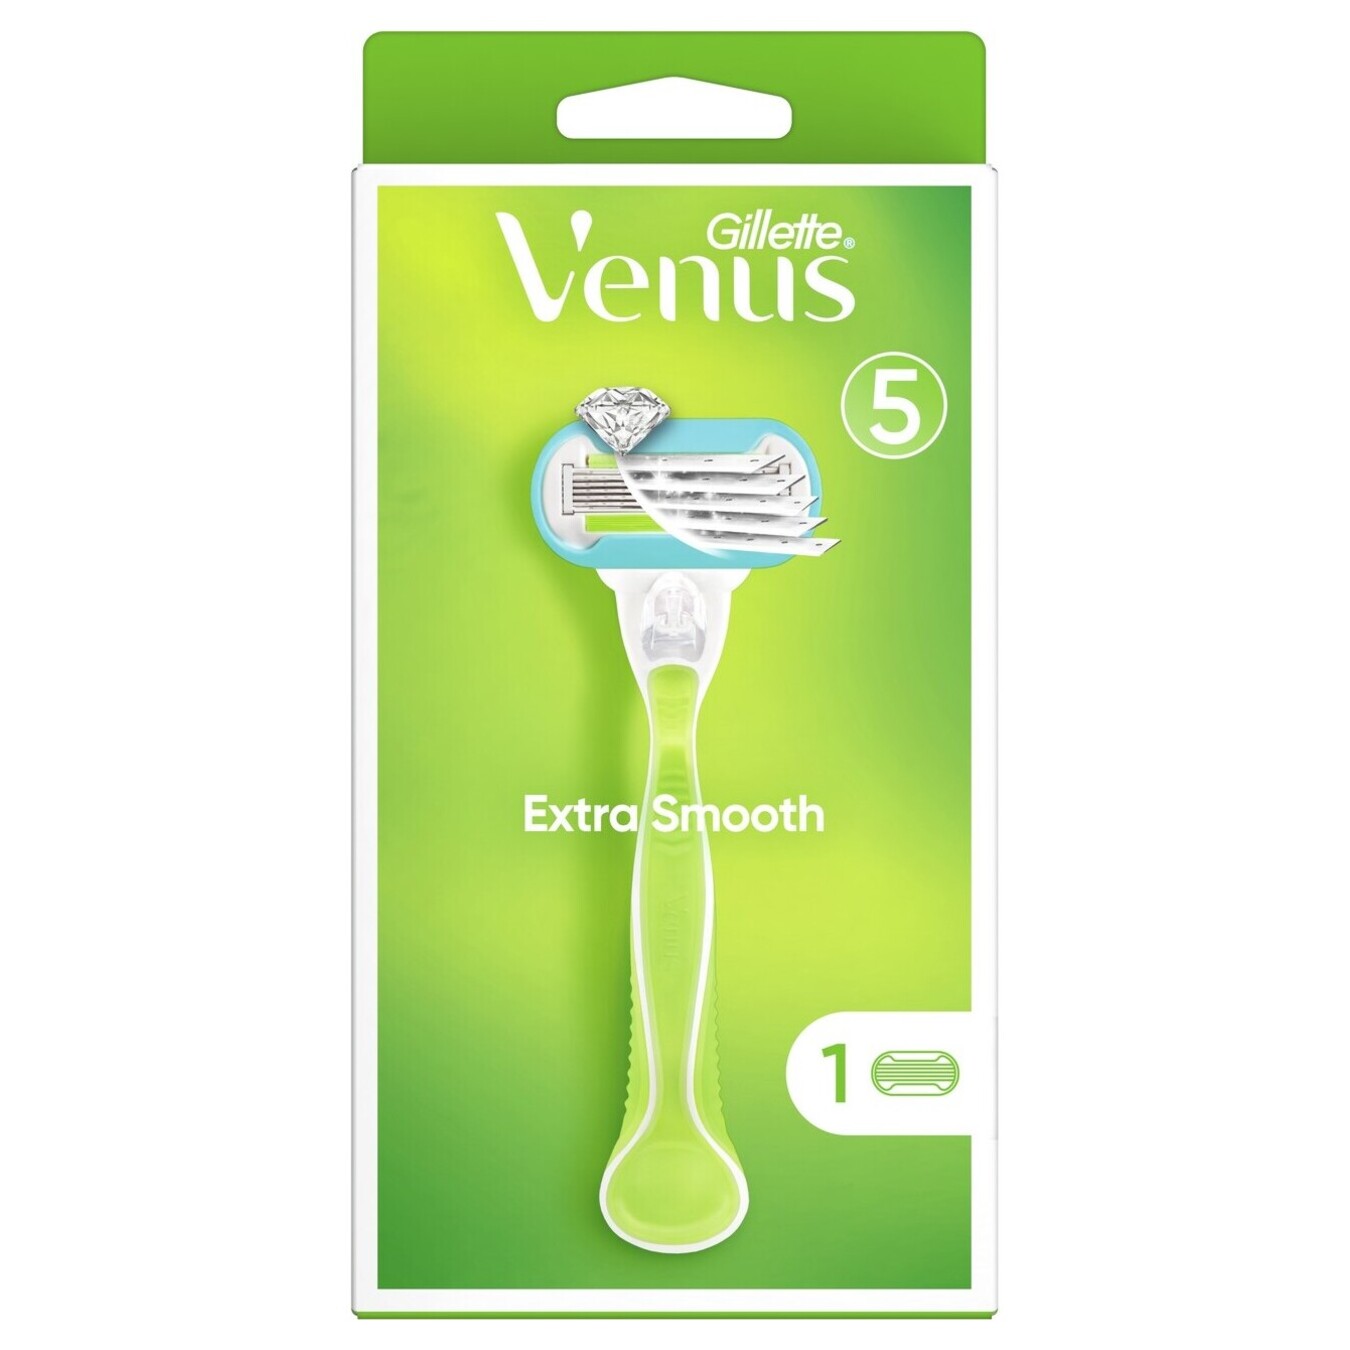 Gillette Venus Extra Smooth extra smooth razor with one replaceable cartridge